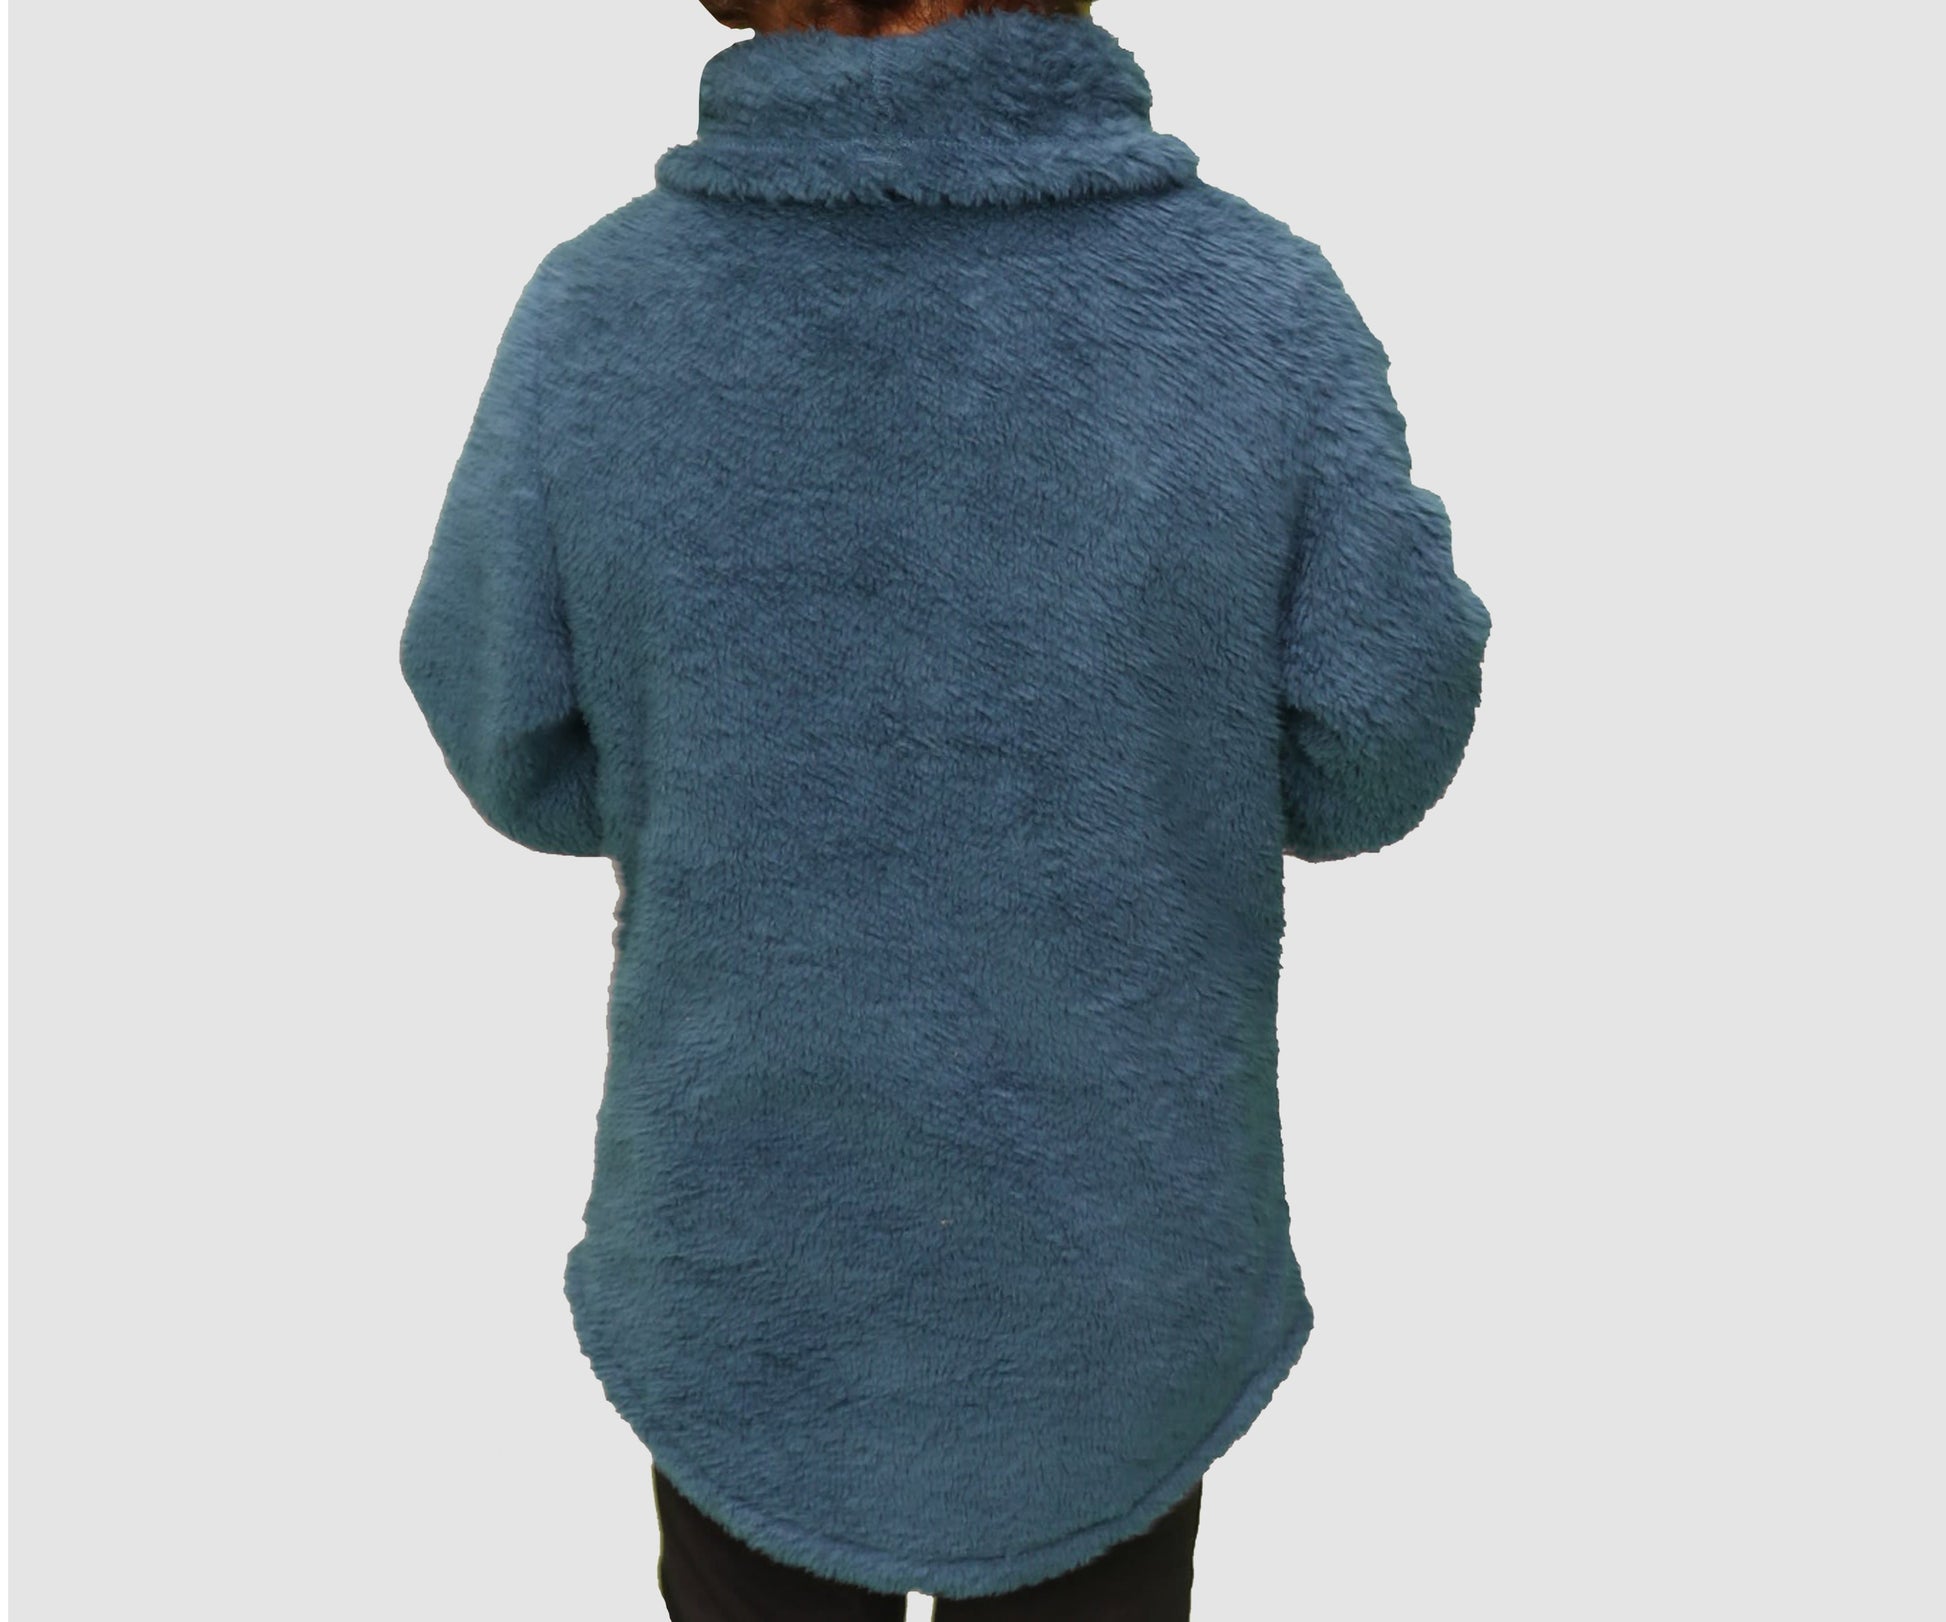 CHAMPION Apparel 4-5 Years / Teal High Neck Long Sleeve Top